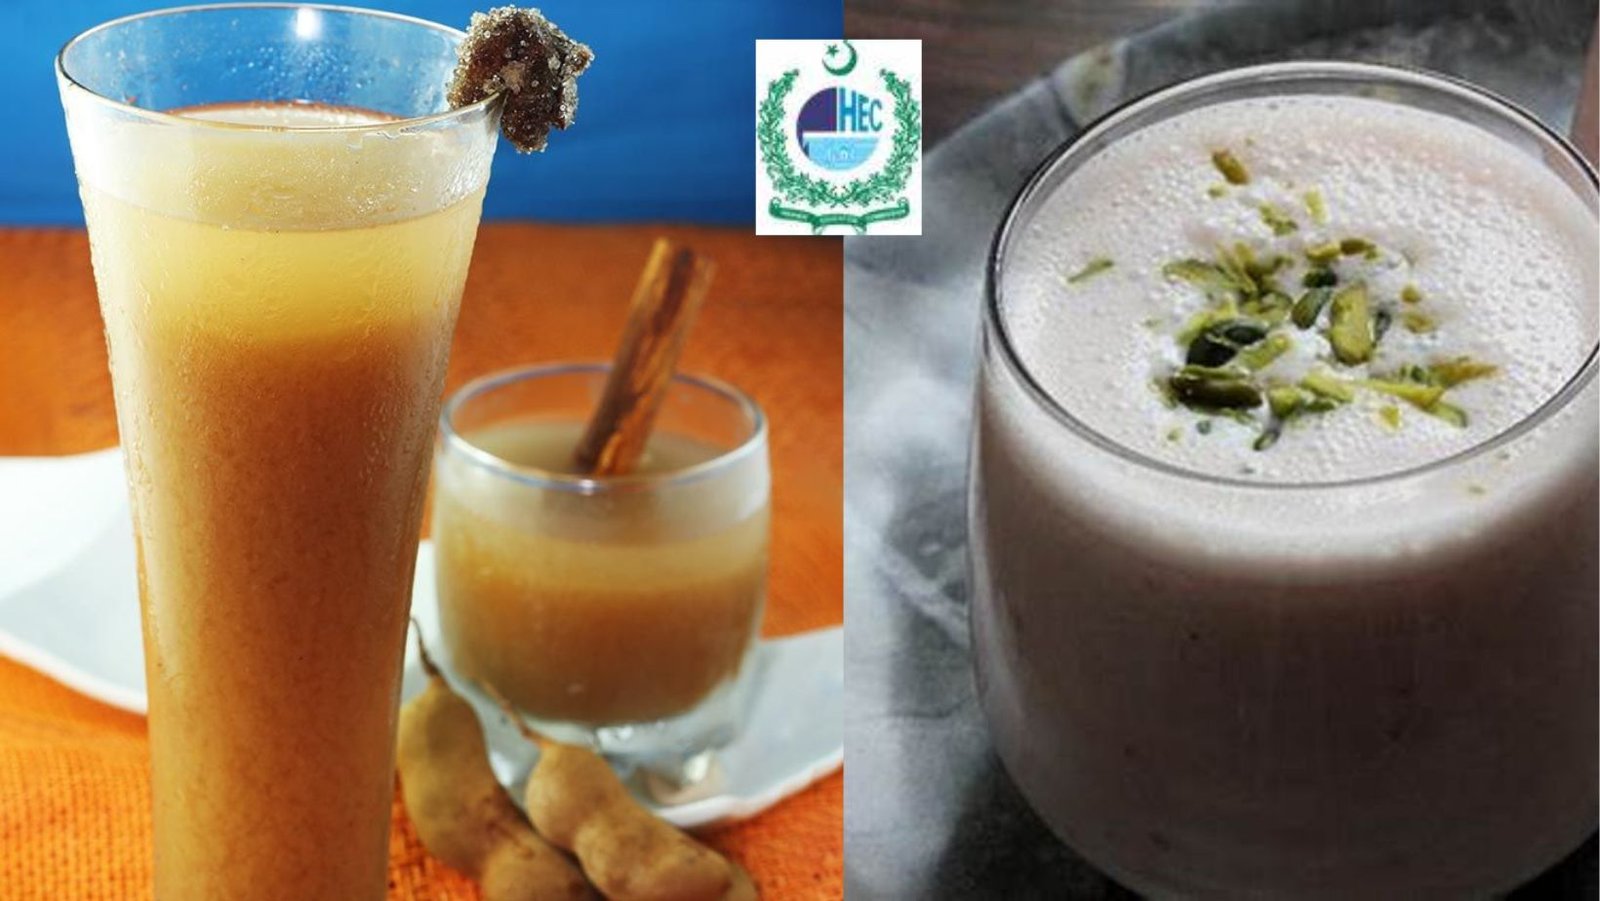 HEC requests that universities promote Lassi and Sattu as alternatives to imported tea